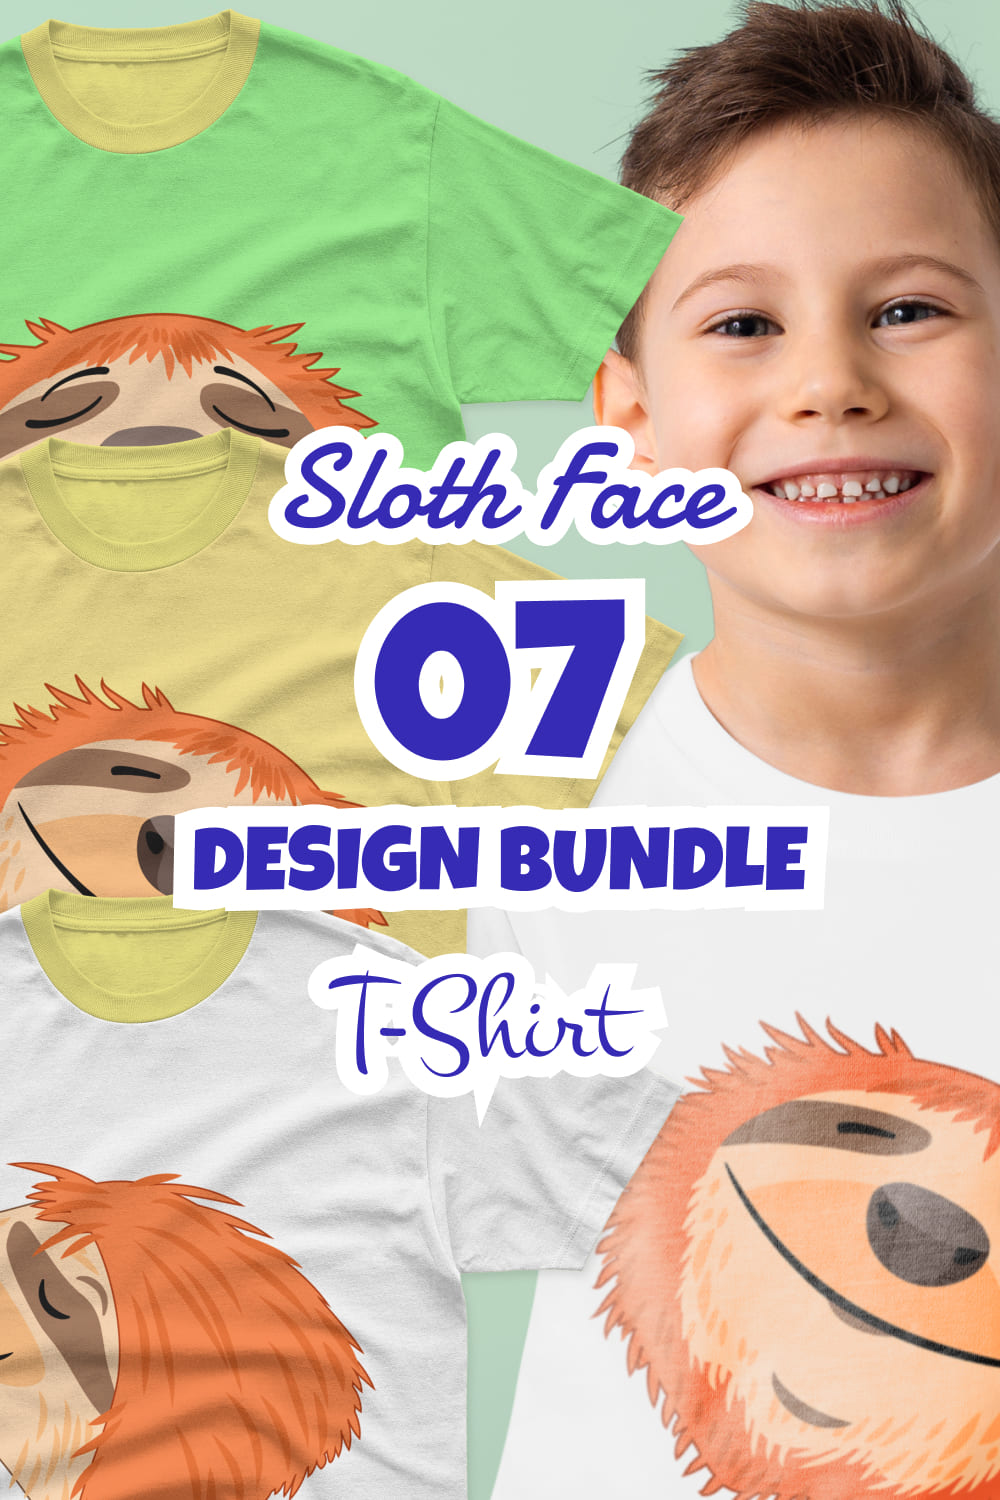 Green, yellow and white t-shirt with the image of a sloth's head with closed eyes.